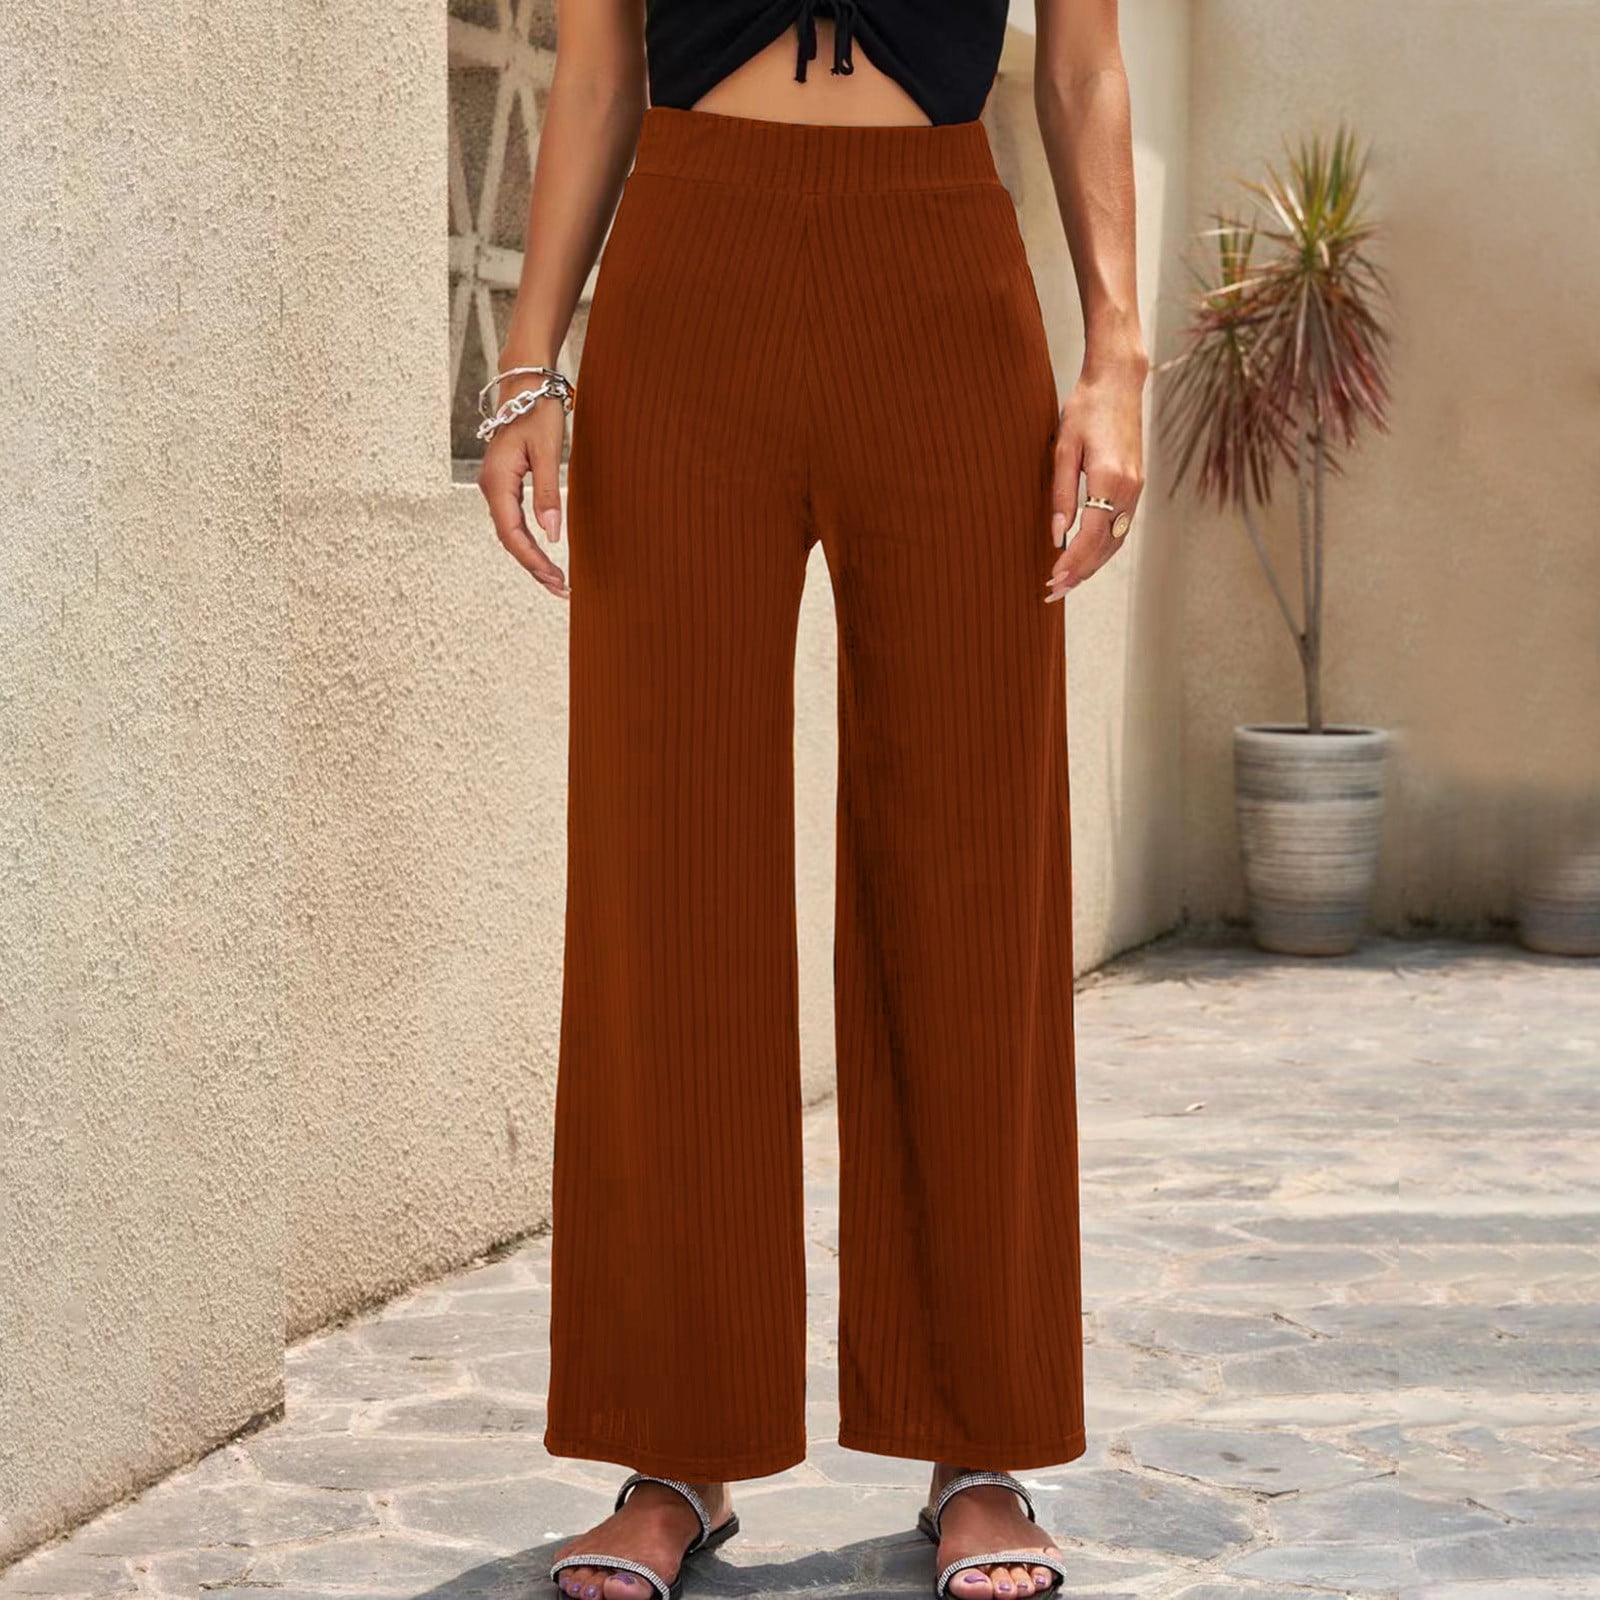 YWDJ Palazzo Pants for Women Petite Formal Relaxed Fit Baggy Wide